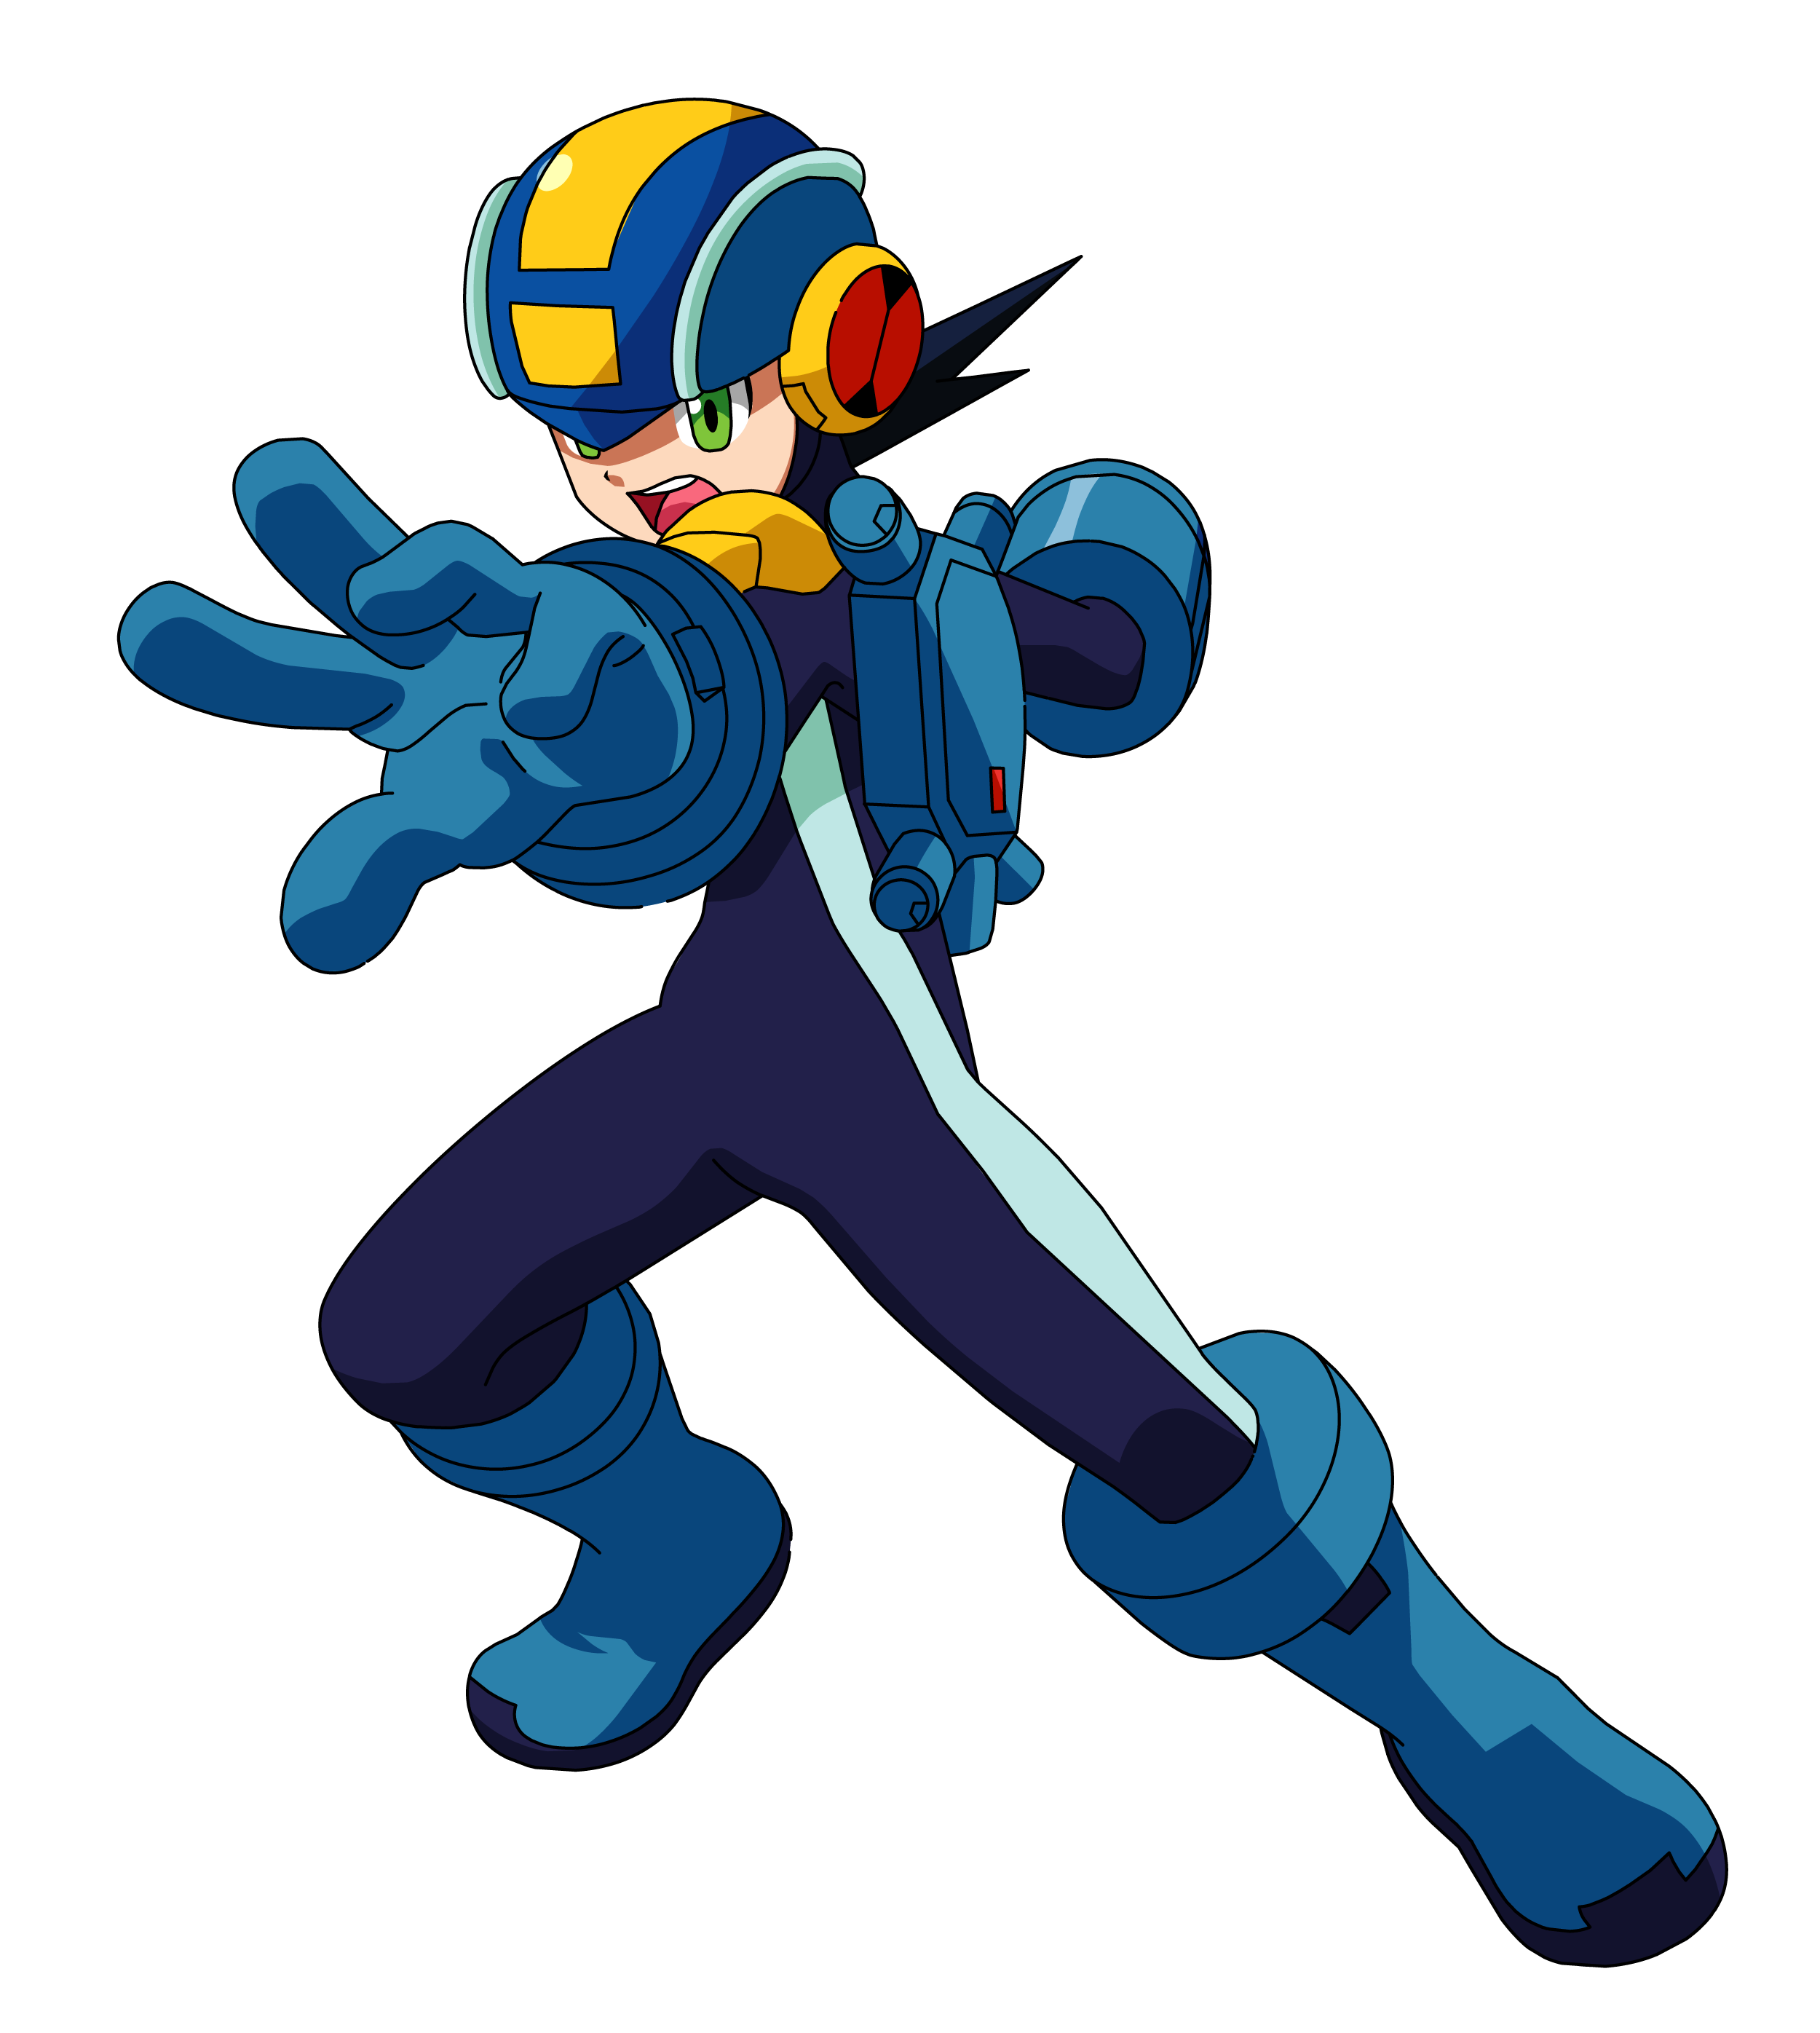 PokeSmashBros on Twitter Heres my third and final afro edit of the day  RollEXE from the Mega Man Battle Network anime with an afro afro アフロ  RollEXE MegaMan MegaManBattleNetwork ロール Roll httpstcoRcrxFIcdvR  